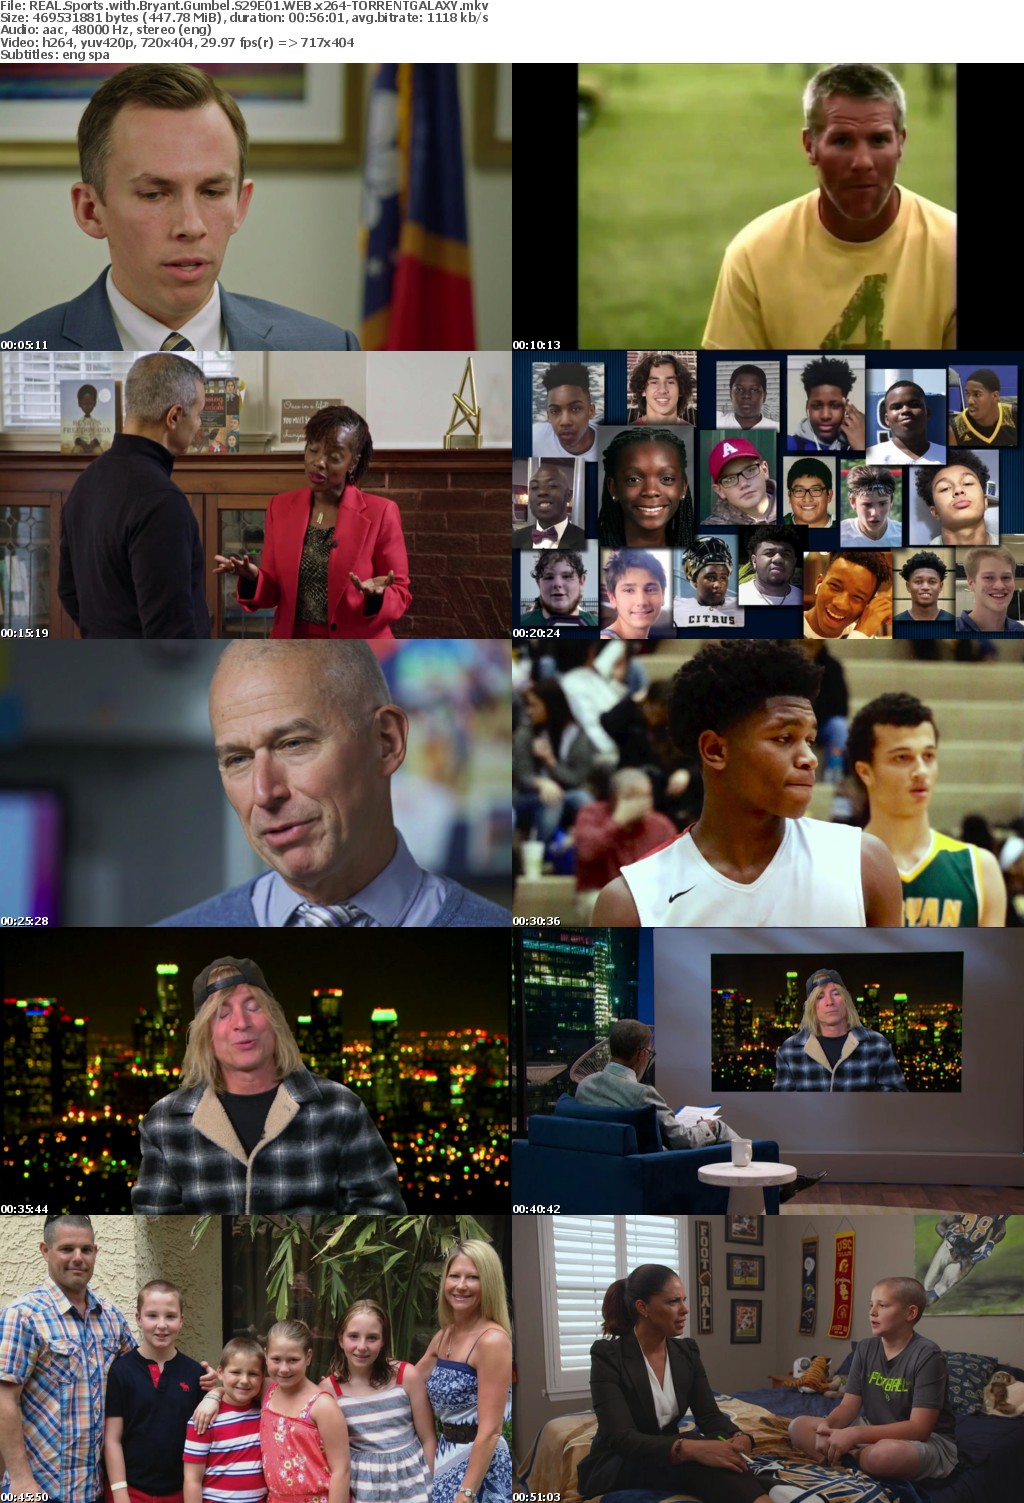 REAL Sports with Bryant Gumbel S29E01 WEB x264-GALAXY